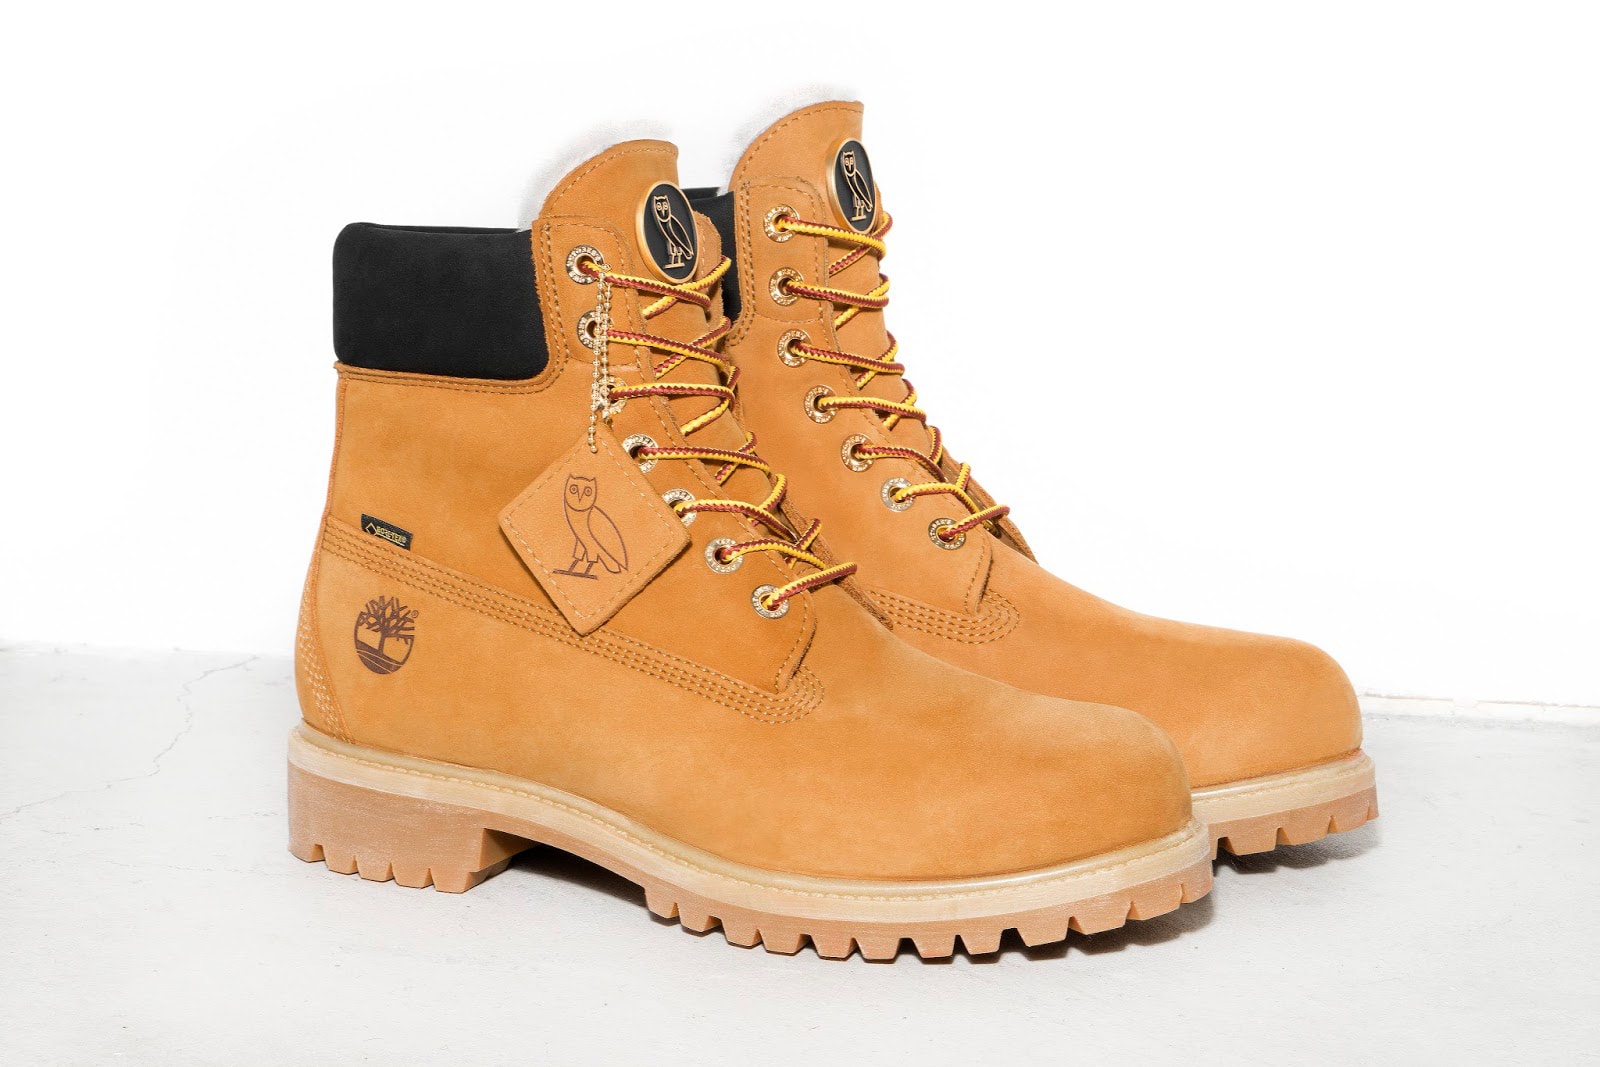 OVO Timberland Premium 6 Inch Boots Wheat Black Octobers Very Own Drake 2017 December 1 Release Date Info Footwear vibram GORE-TEX shearling lining